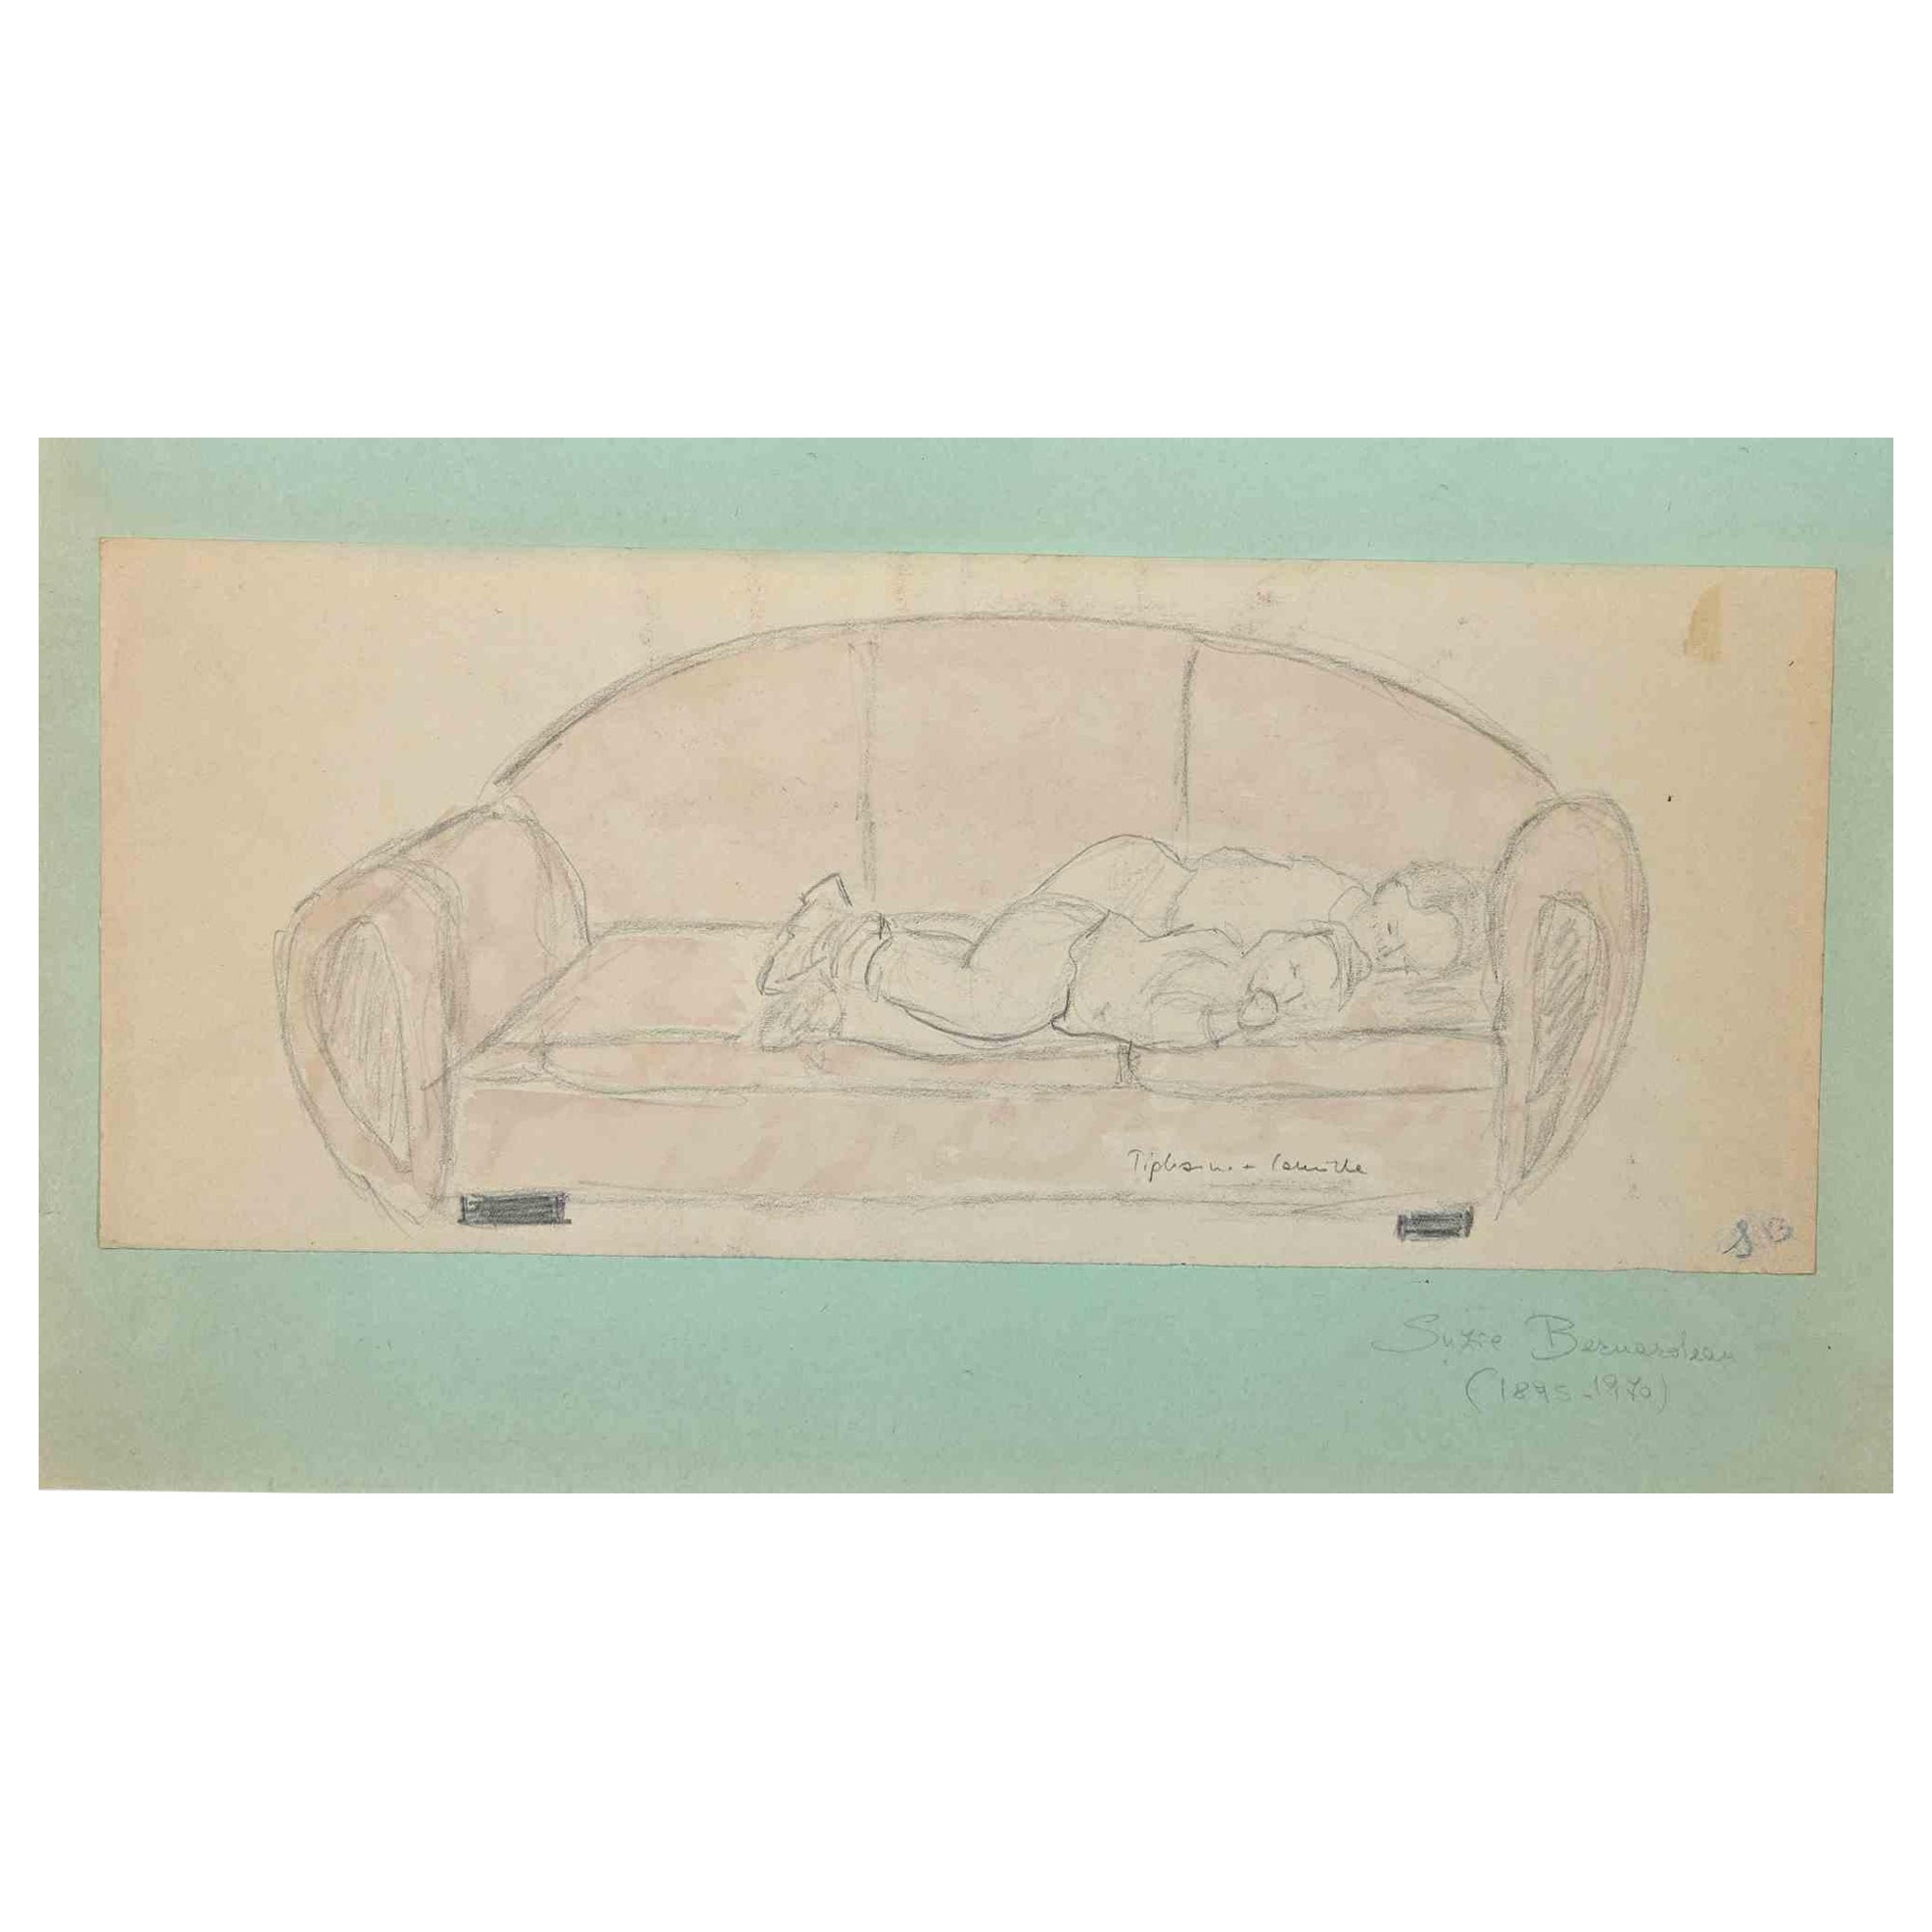 Sleeping is an original drawing in pencil realized by Suzie Bernardeau in the mid-20th Century.

Good conditions.

Hand-signed.

The artwork is depicted through soft strokes in a well-balanced co position.